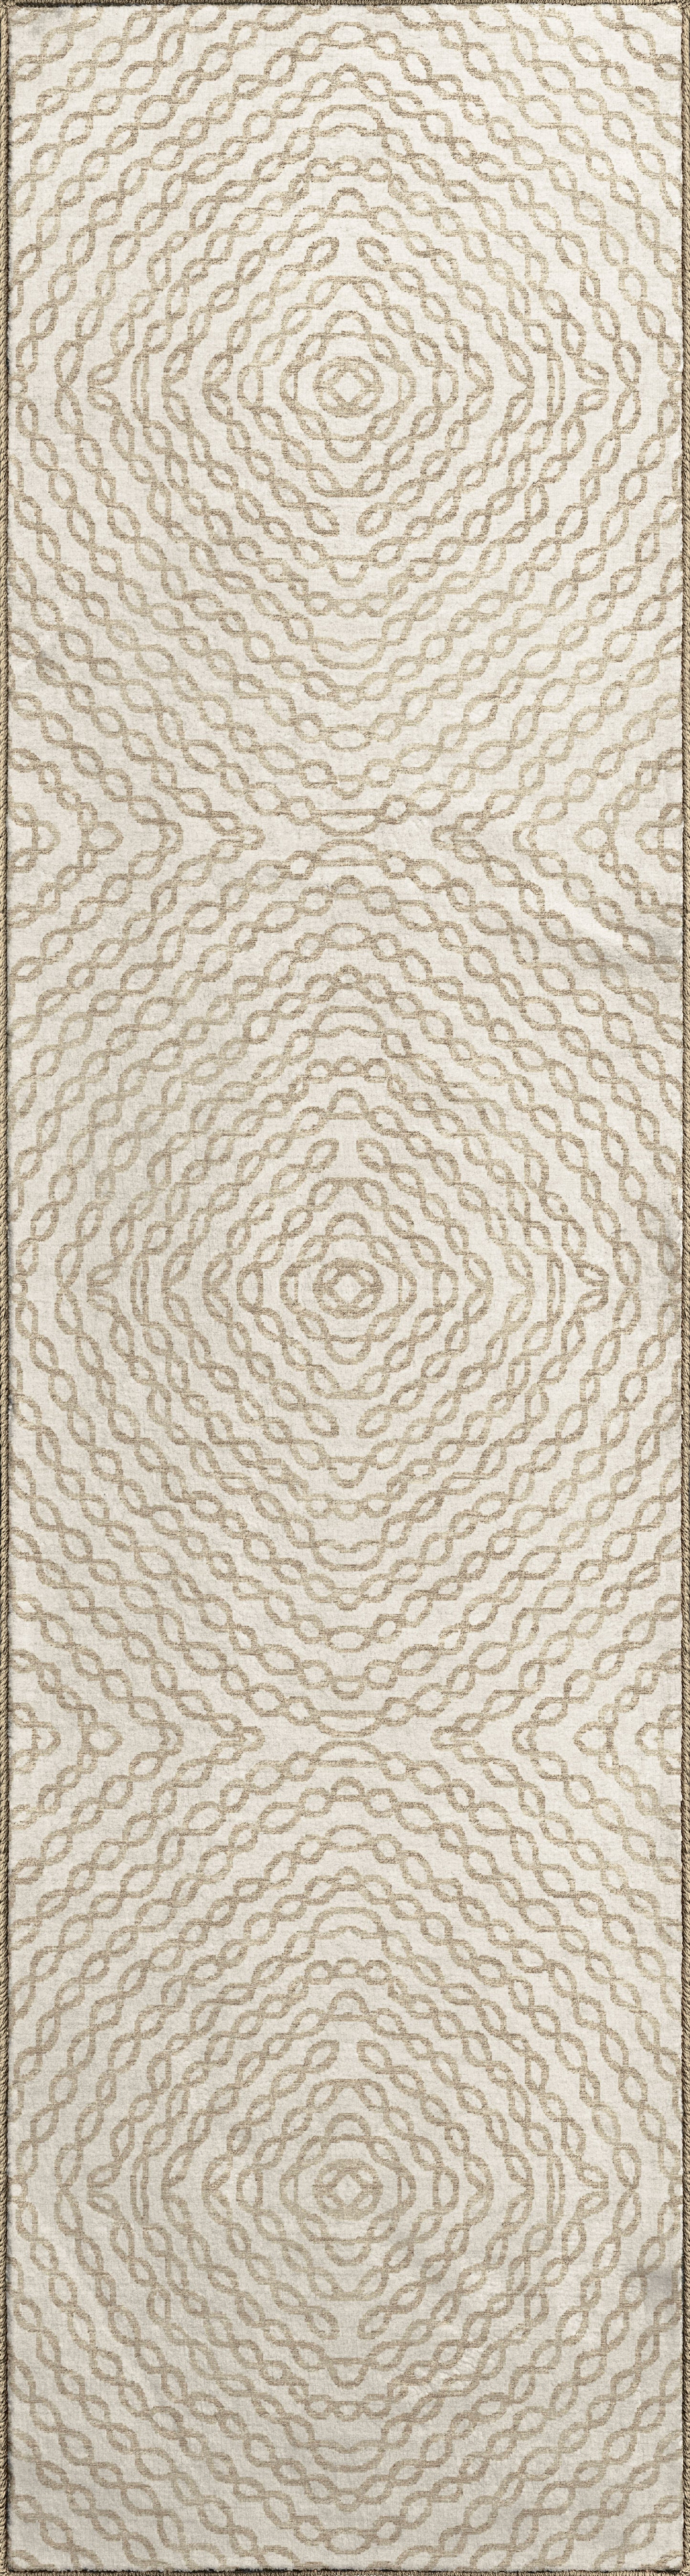 Brisbane BR3 Machine Made Synthetic Blend Indoor Area Rug by Dalyn Rugs